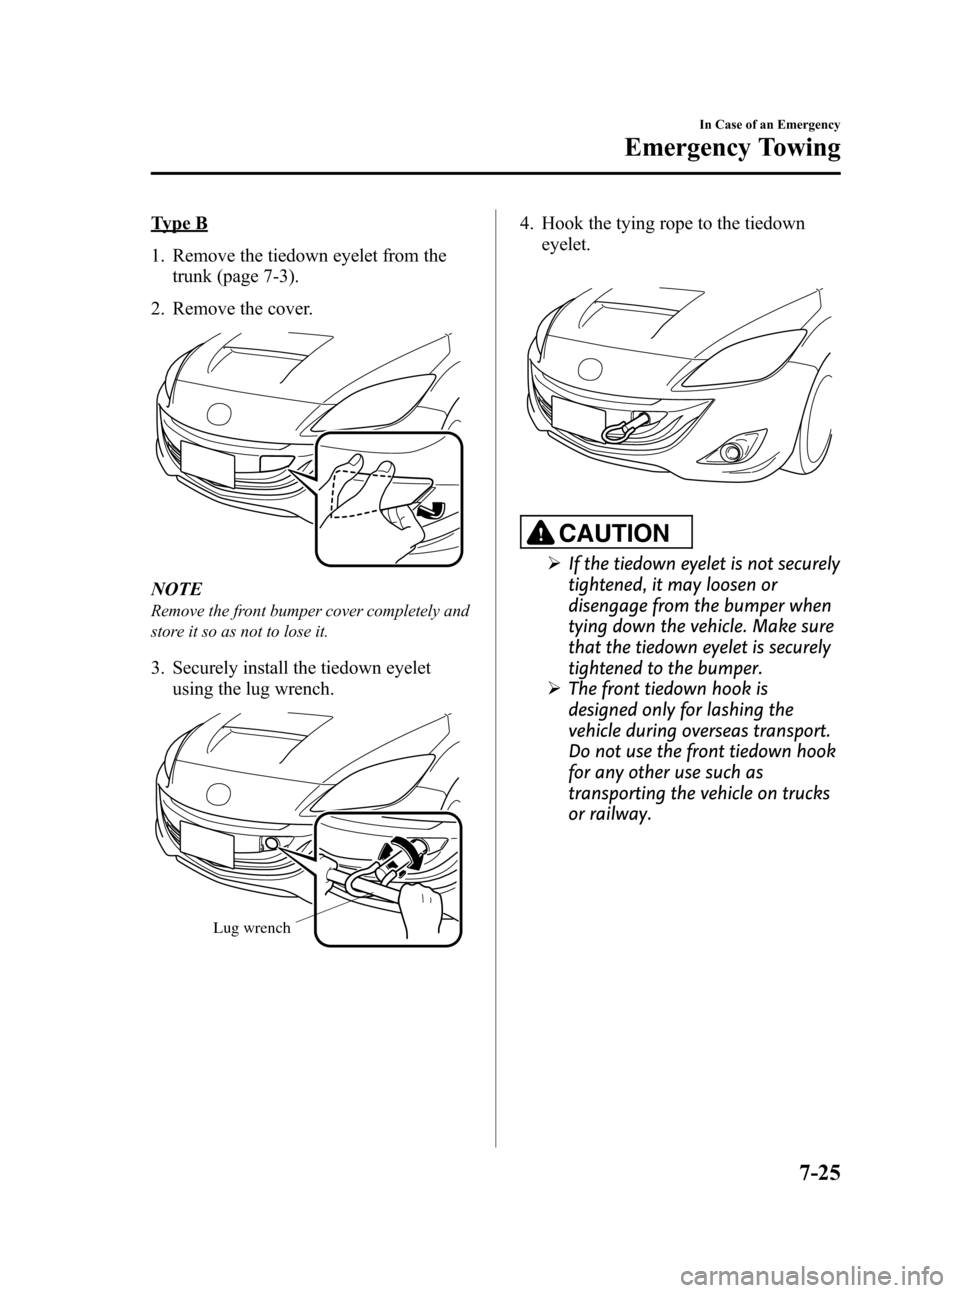 MAZDA MODEL 3 HATCHBACK 2011  Owners Manual (in English) Black plate (371,1)
Type B
1. Remove the tiedown eyelet from thetrunk (page 7-3).
2. Remove the cover.
NOTE
Remove the front bumper cover completely and
store it so as not to lose it.
3. Securely inst